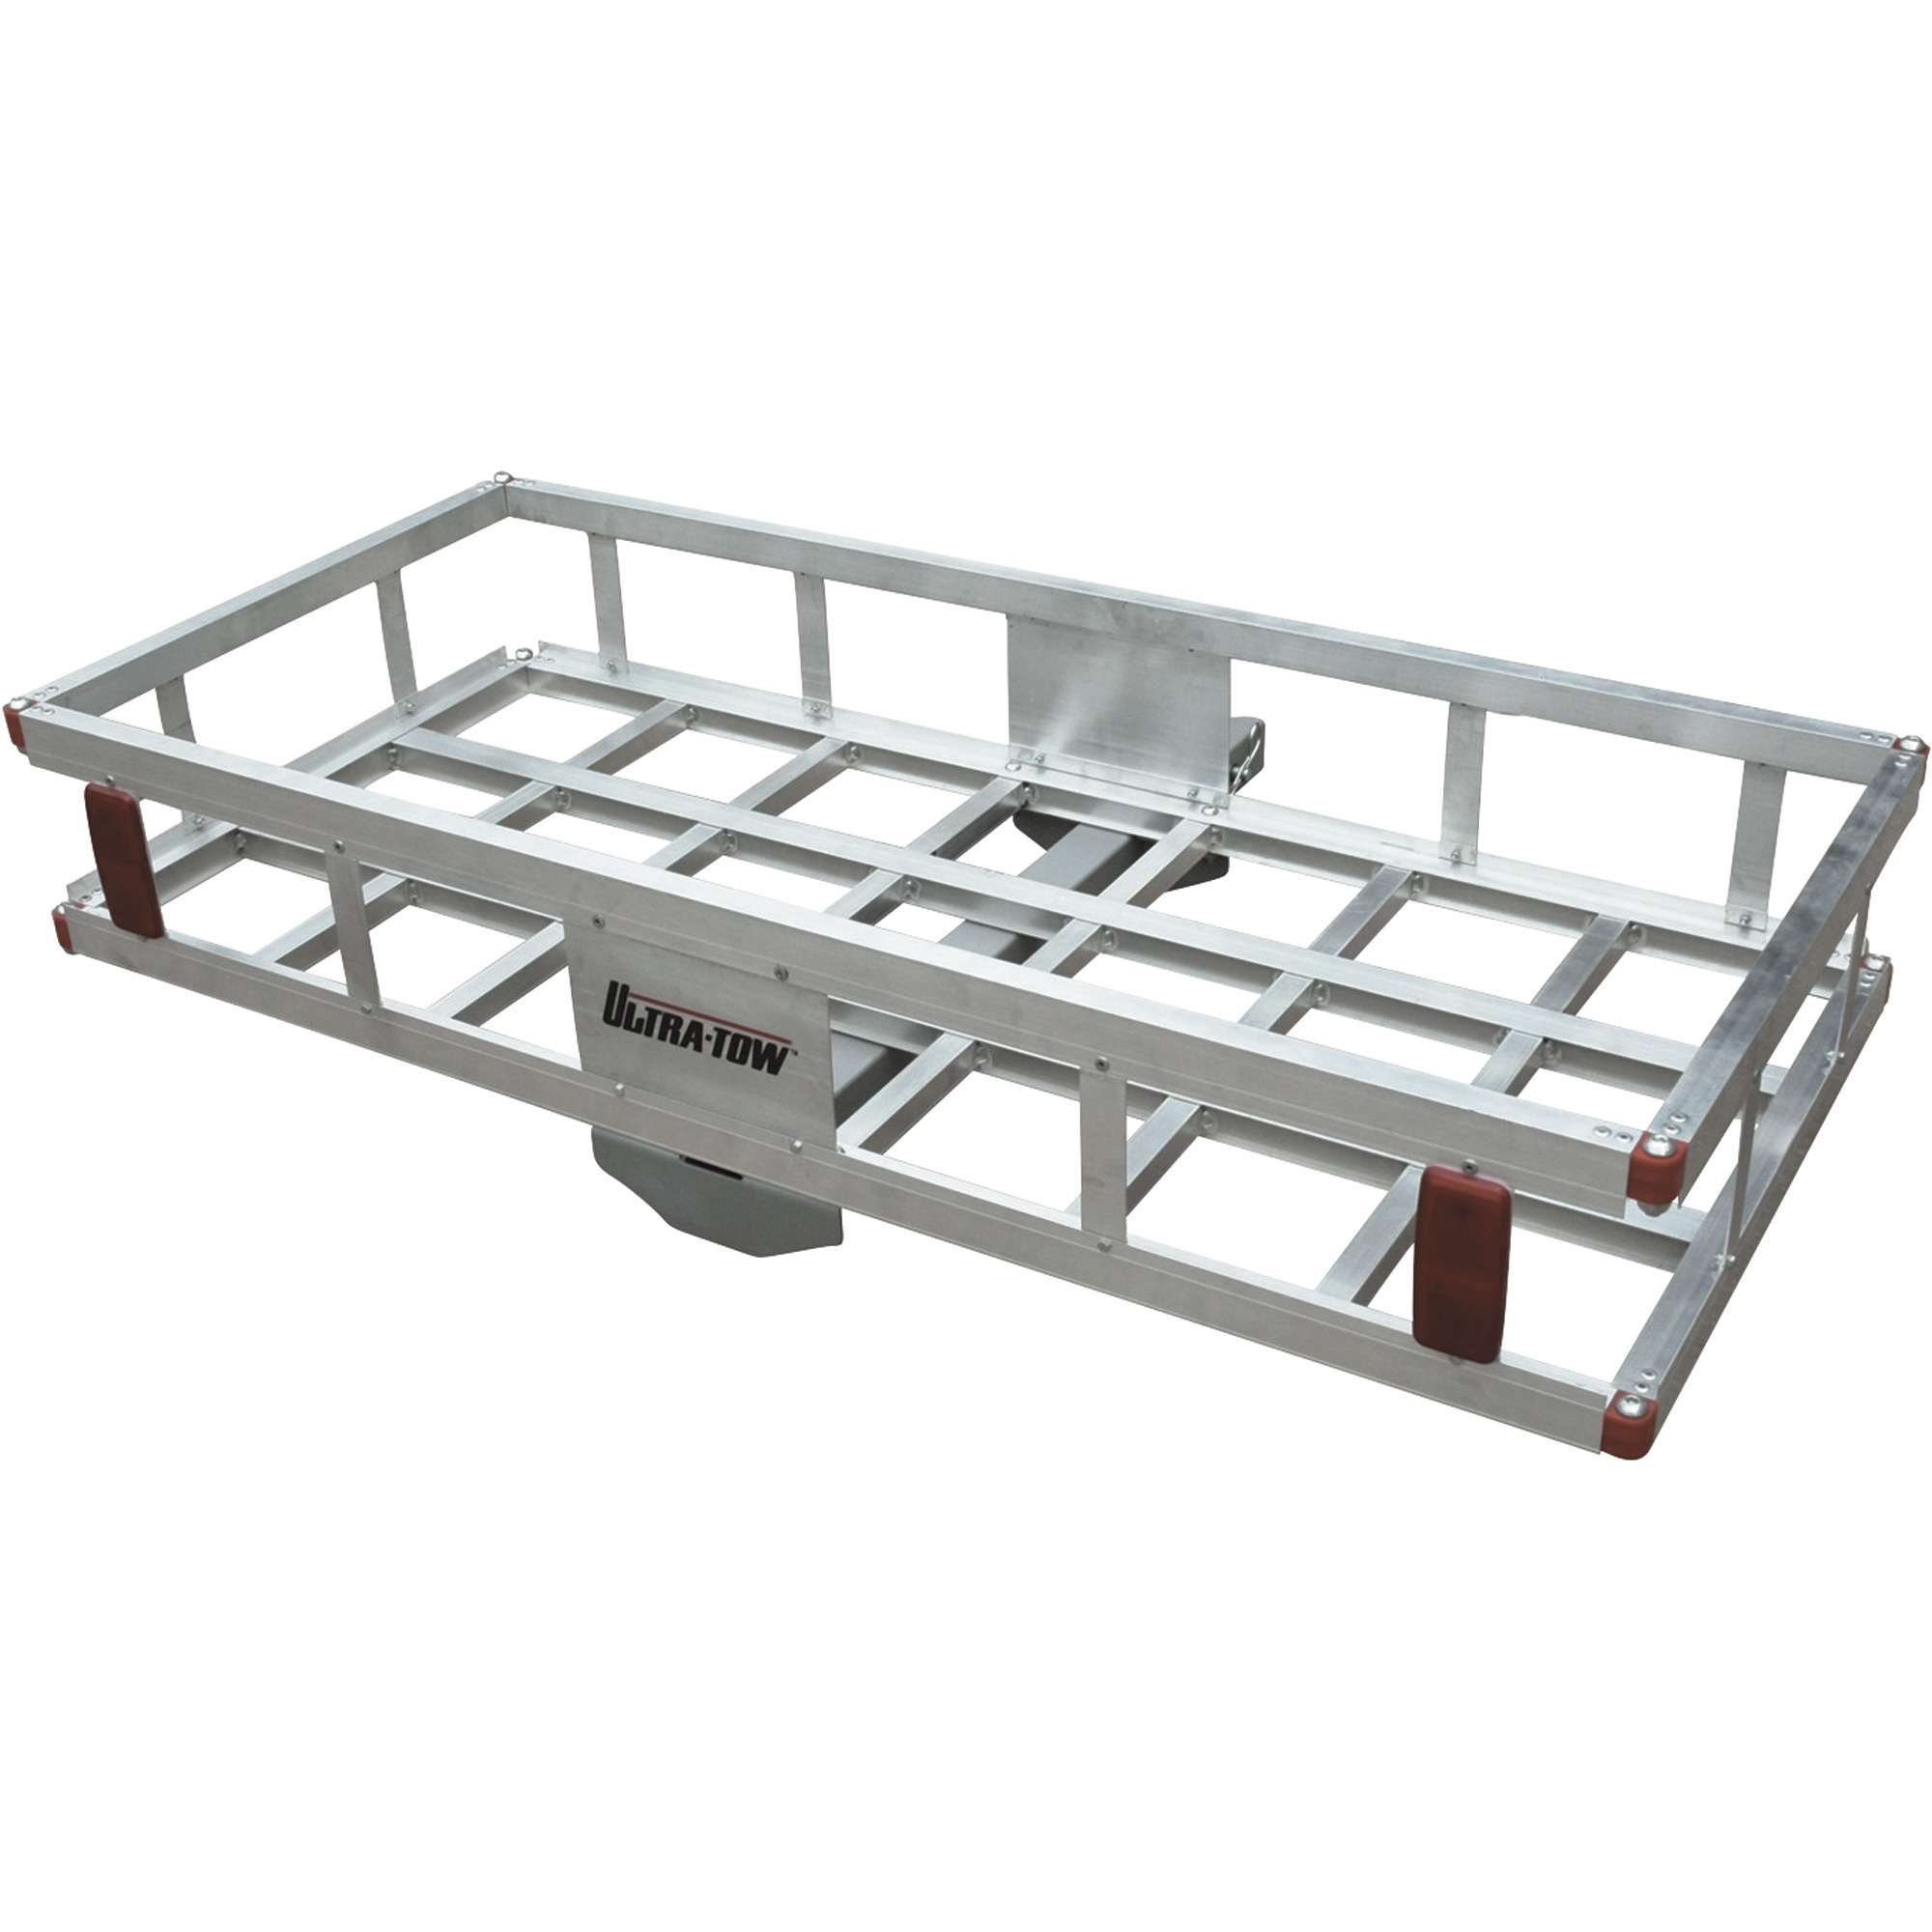 Ultra-Tow Aluminum Hitch Cargo Carrier, 500-Lb. Capacity, Silver, 49Inch x 22.5Inch x 8Inch H